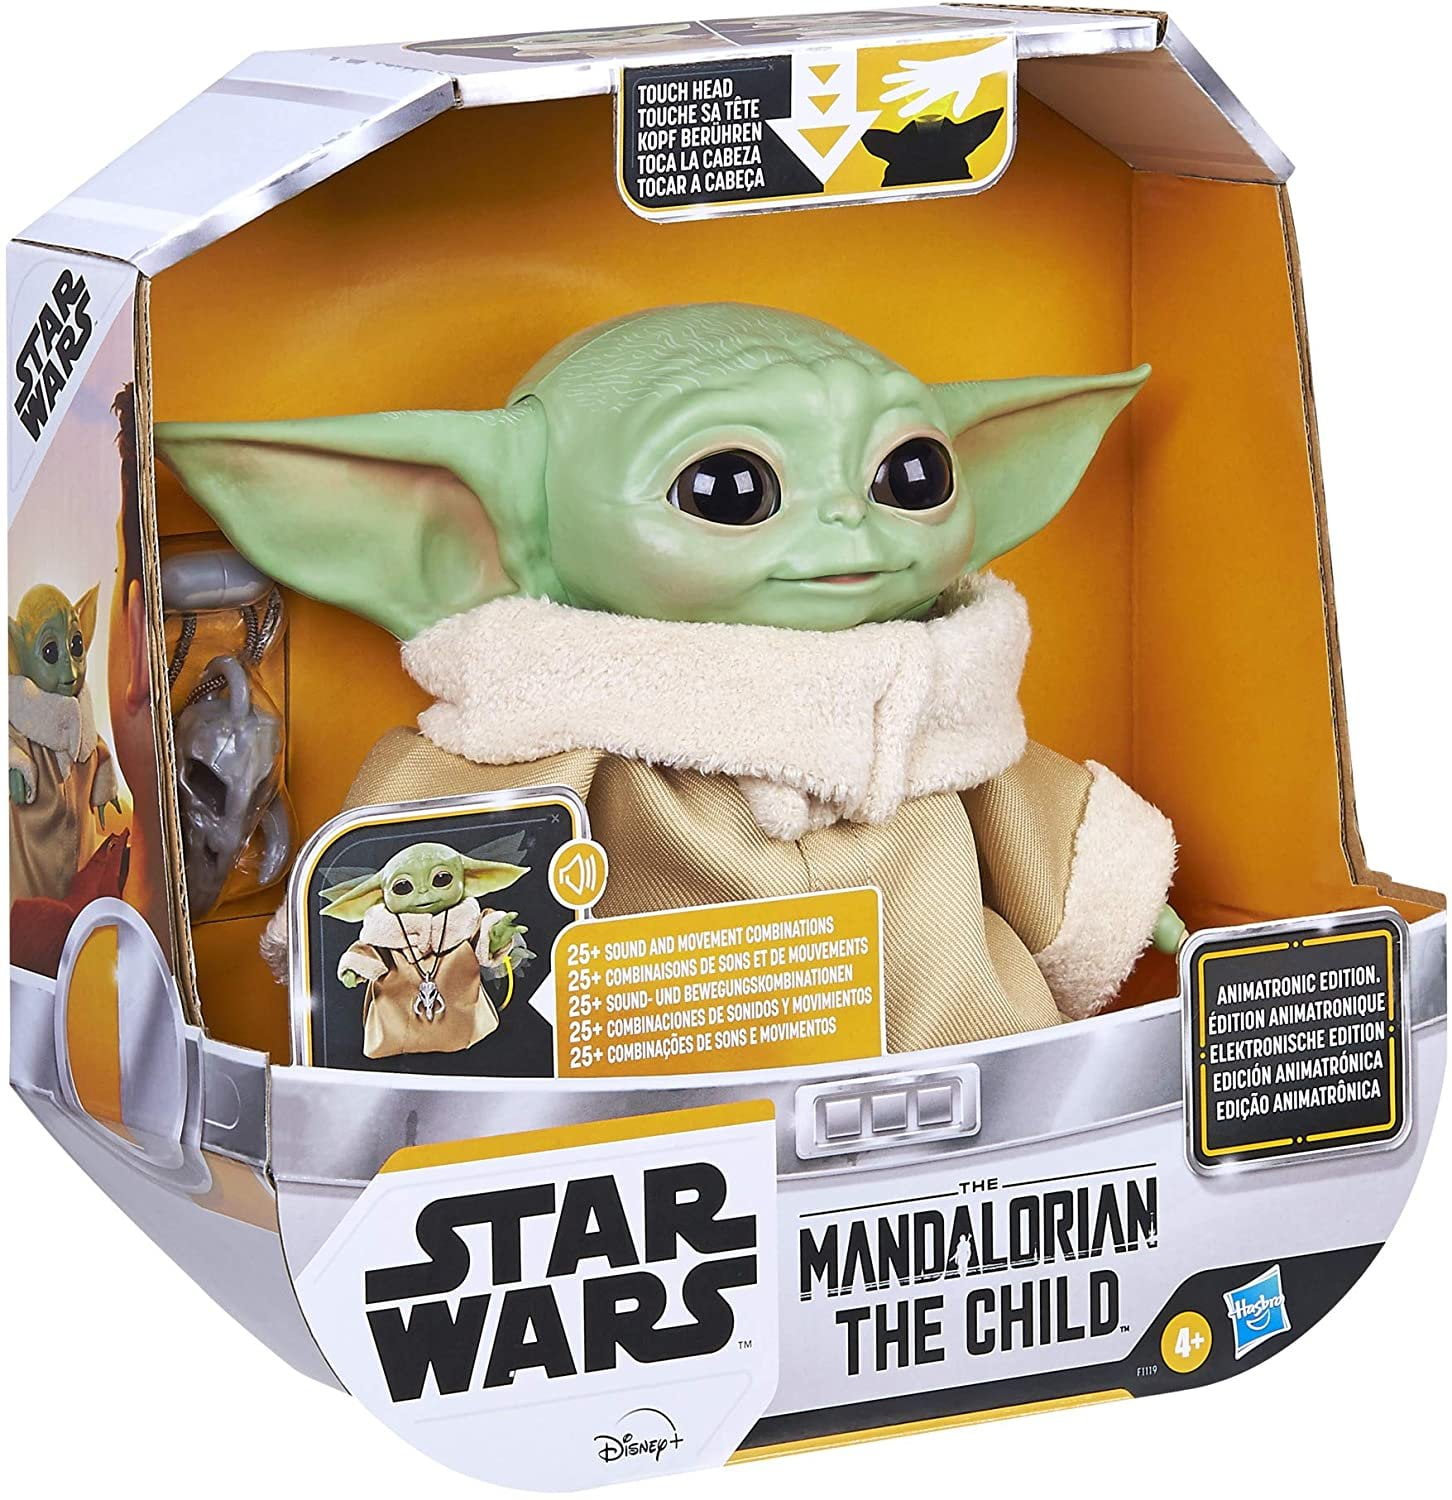 Hasbro Star Wars Baby Yoda The Child Animatronic Edition Action Figure F1119 for sale online 